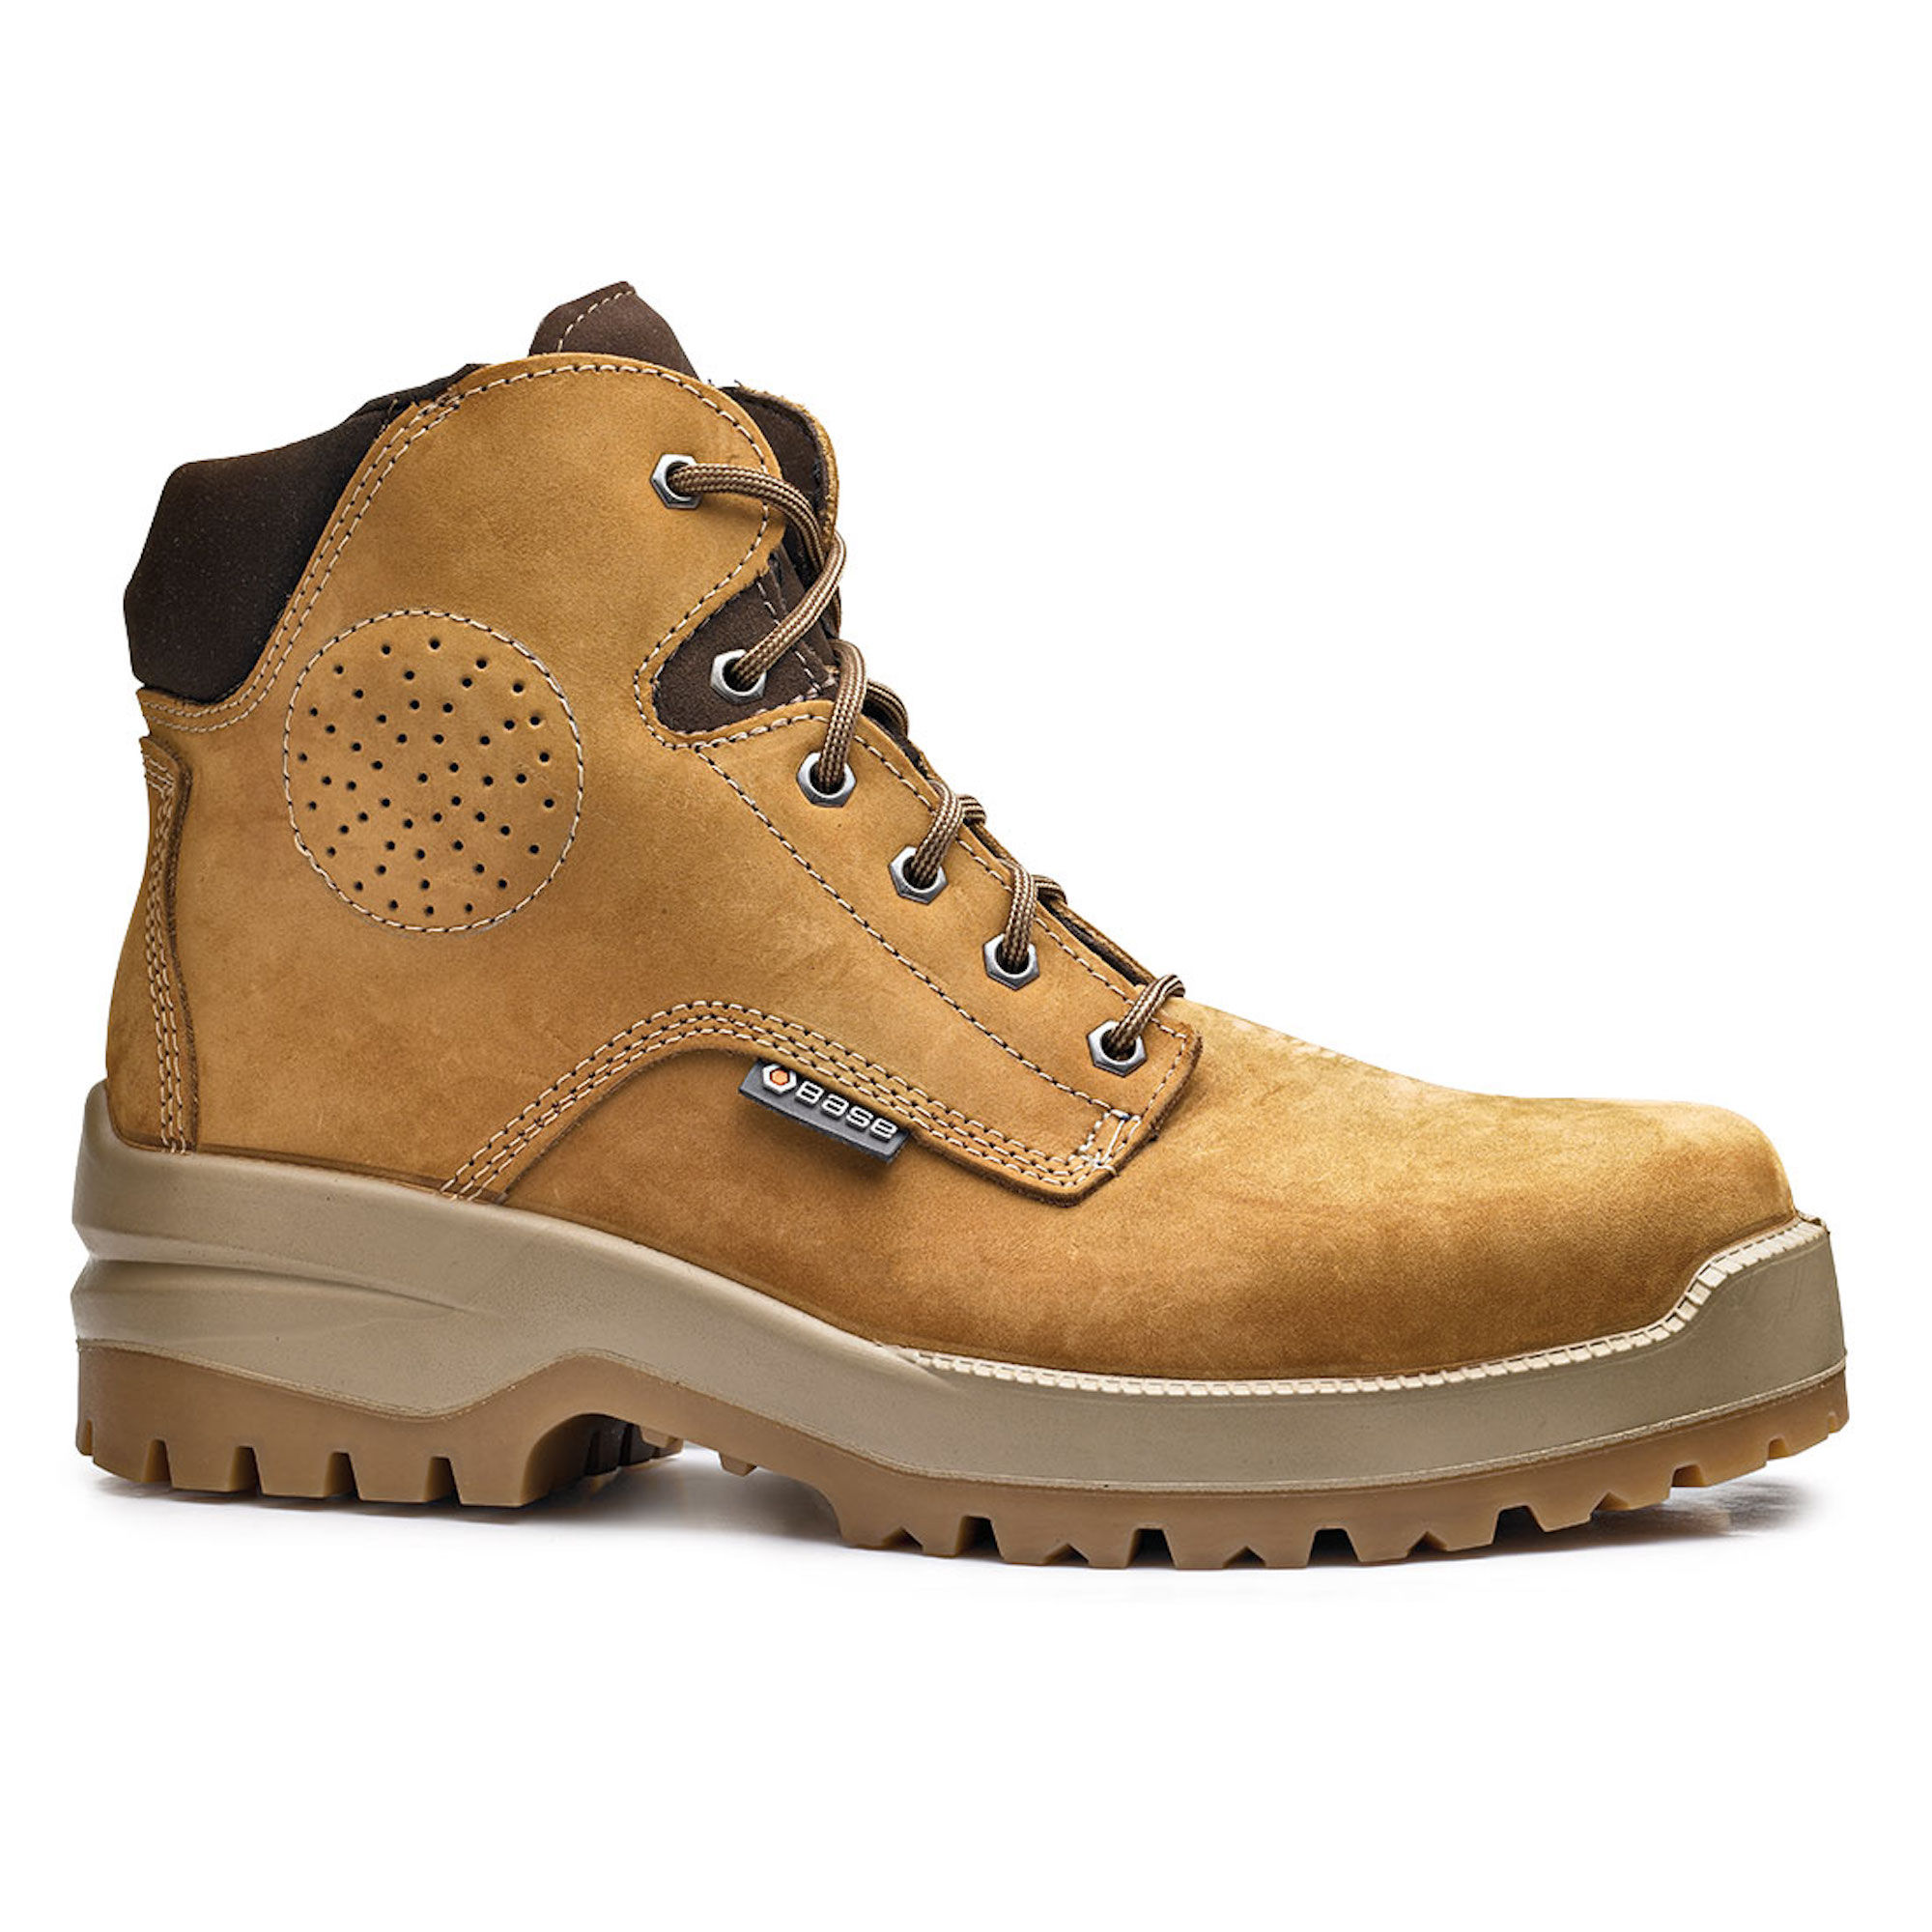 Portwest Camel-Top Safety Boots